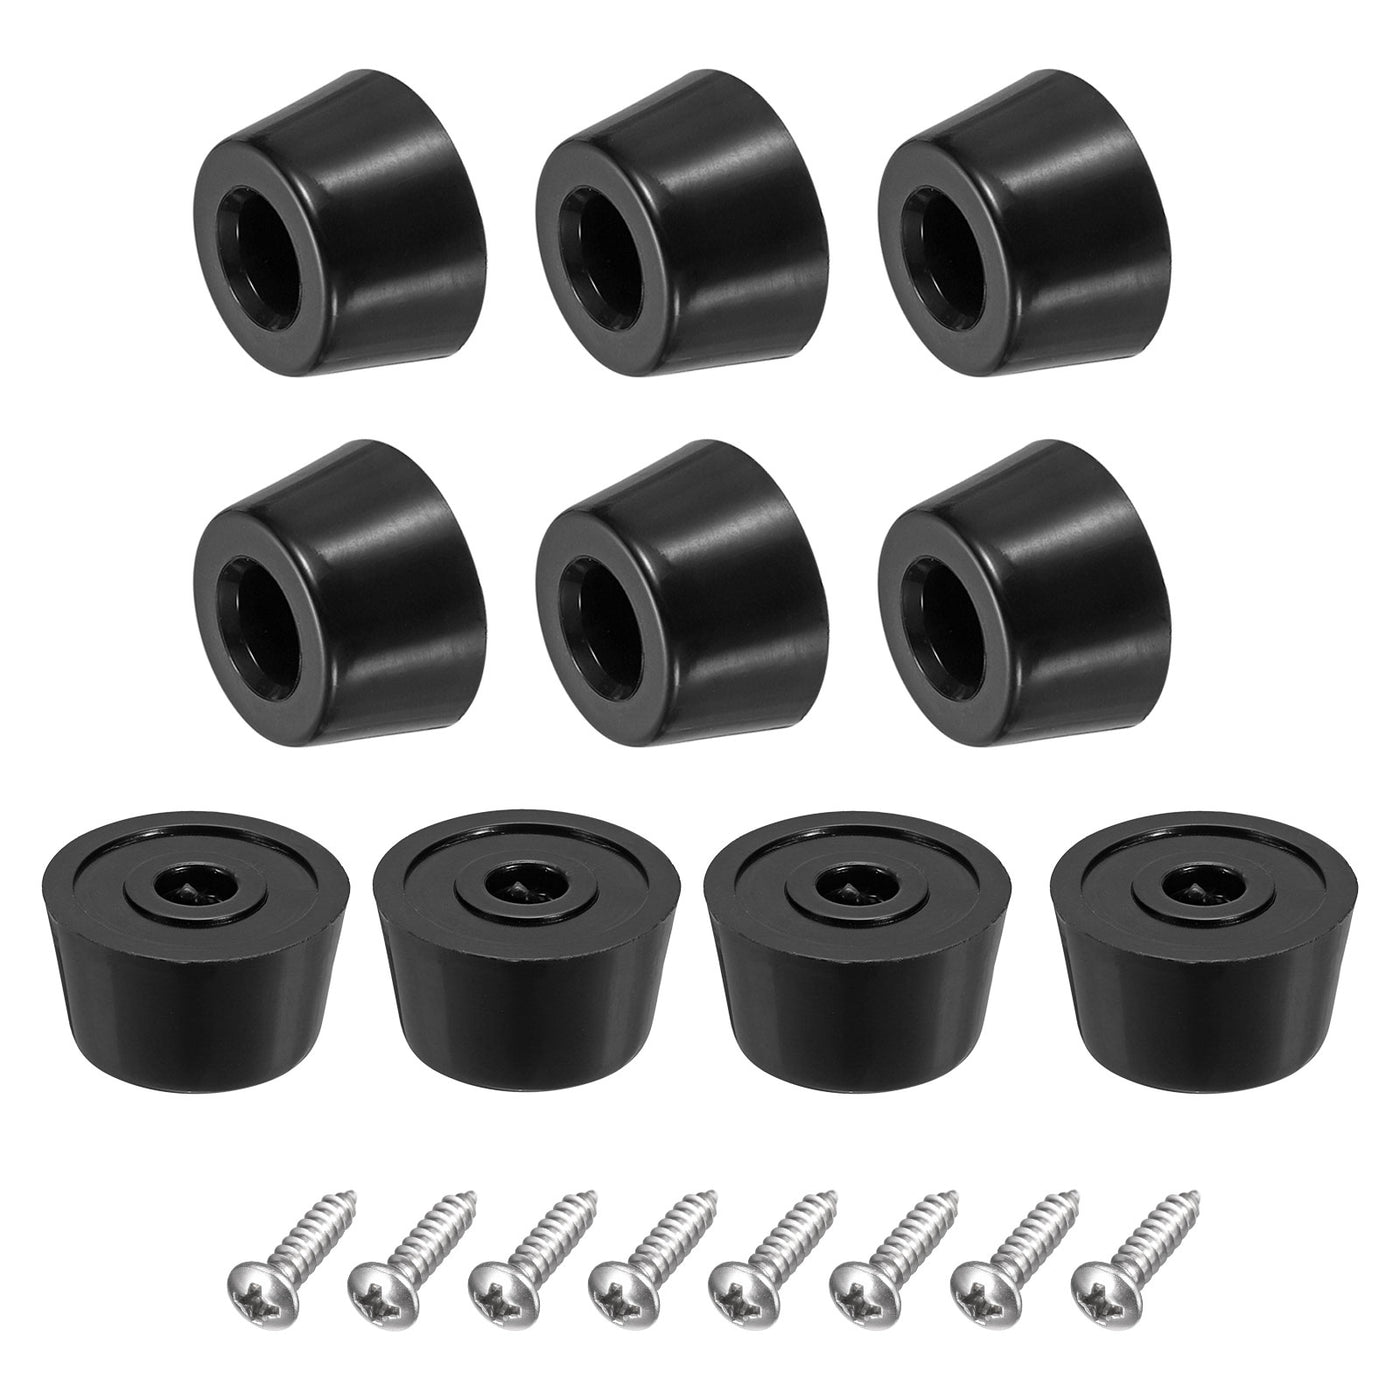 uxcell Uxcell 10Pcs Rubber Bumper Feet, 0.47" H x 0.83" W Round Pads with Stainless Steel Washer and Screws for Furniture, Appliances, Electronics